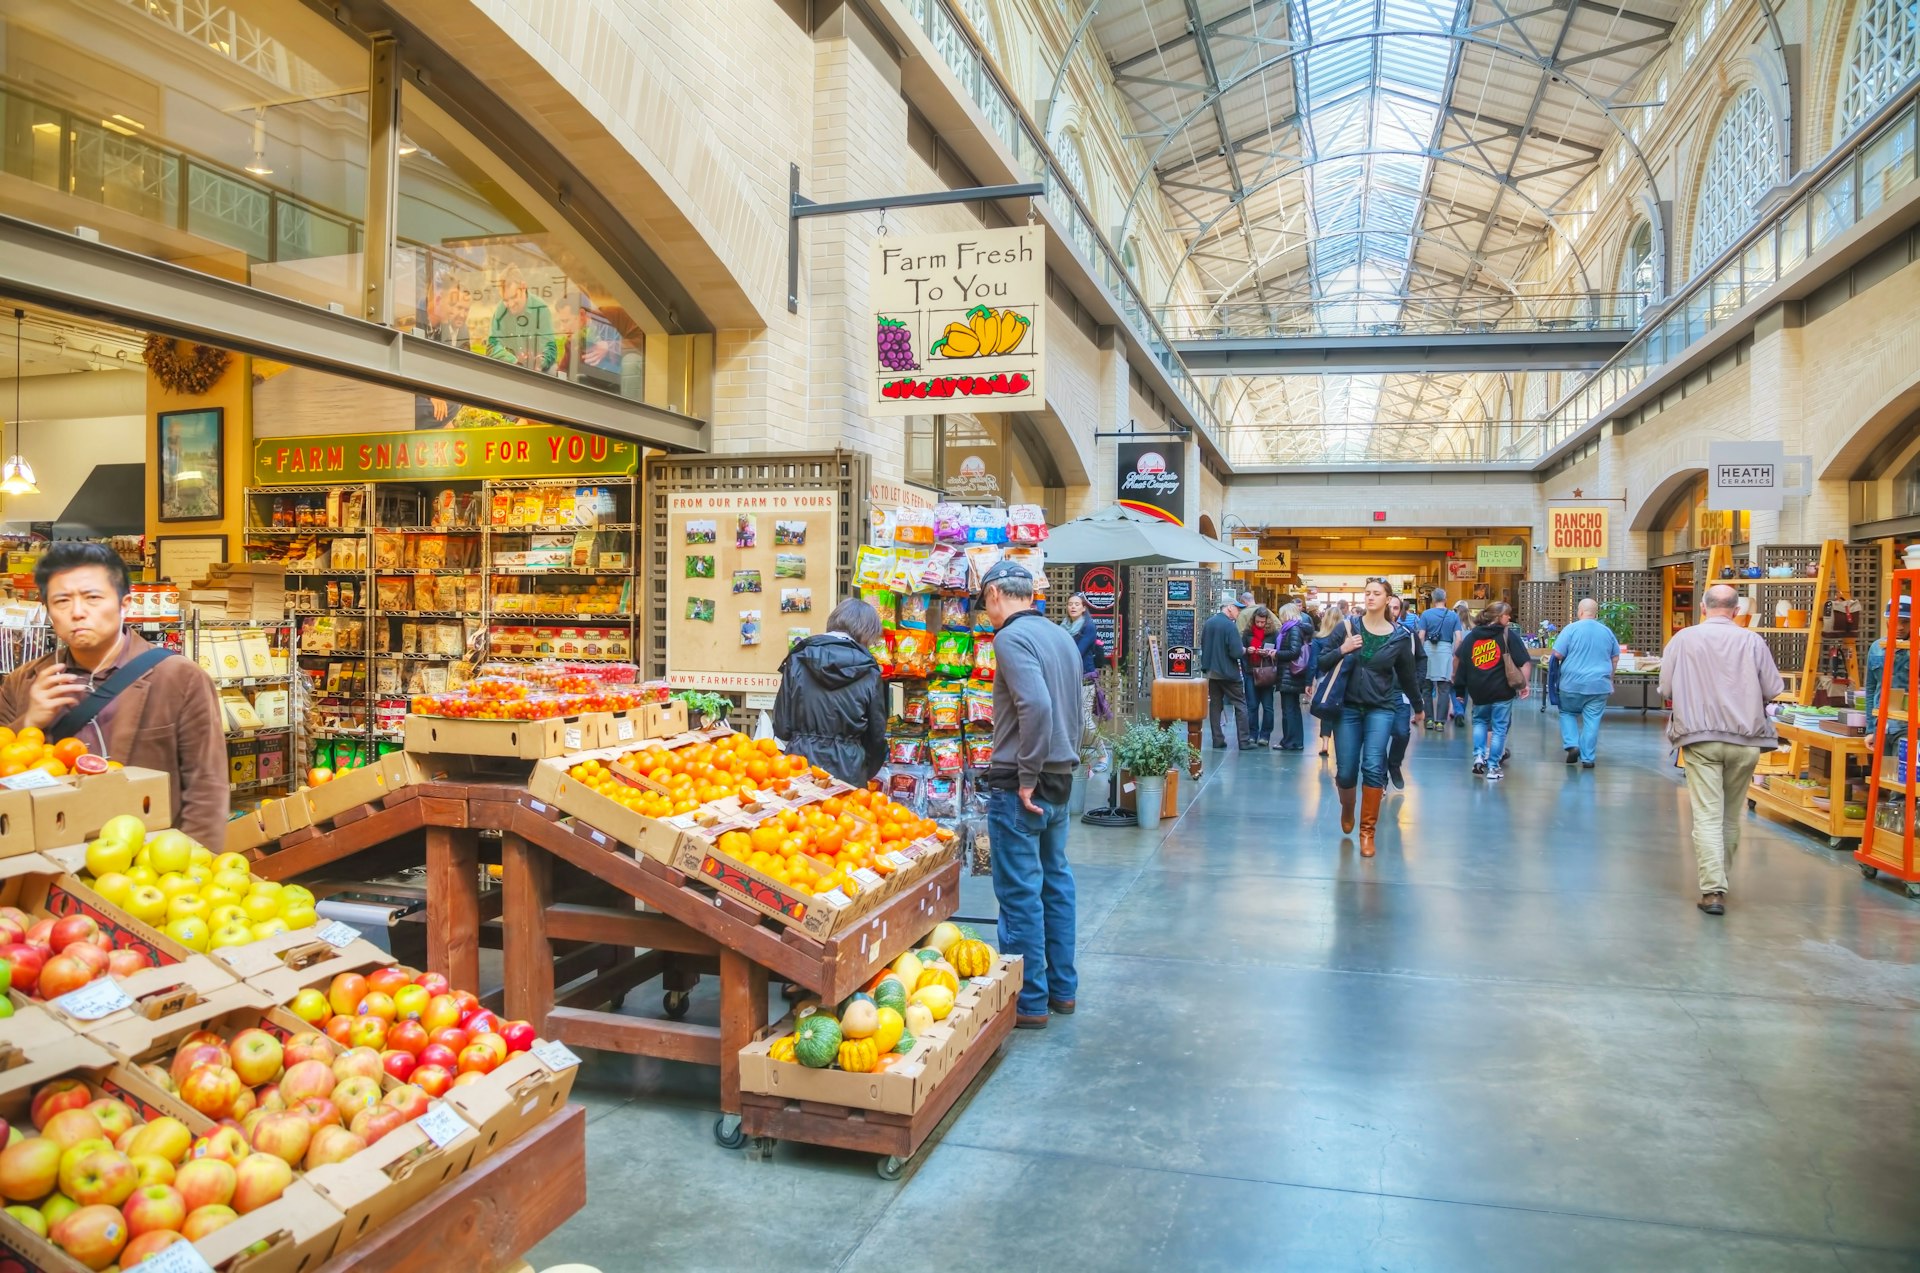 Farmers market hall inside the Ferry building in San Francisco, with vendors displaying quality produce